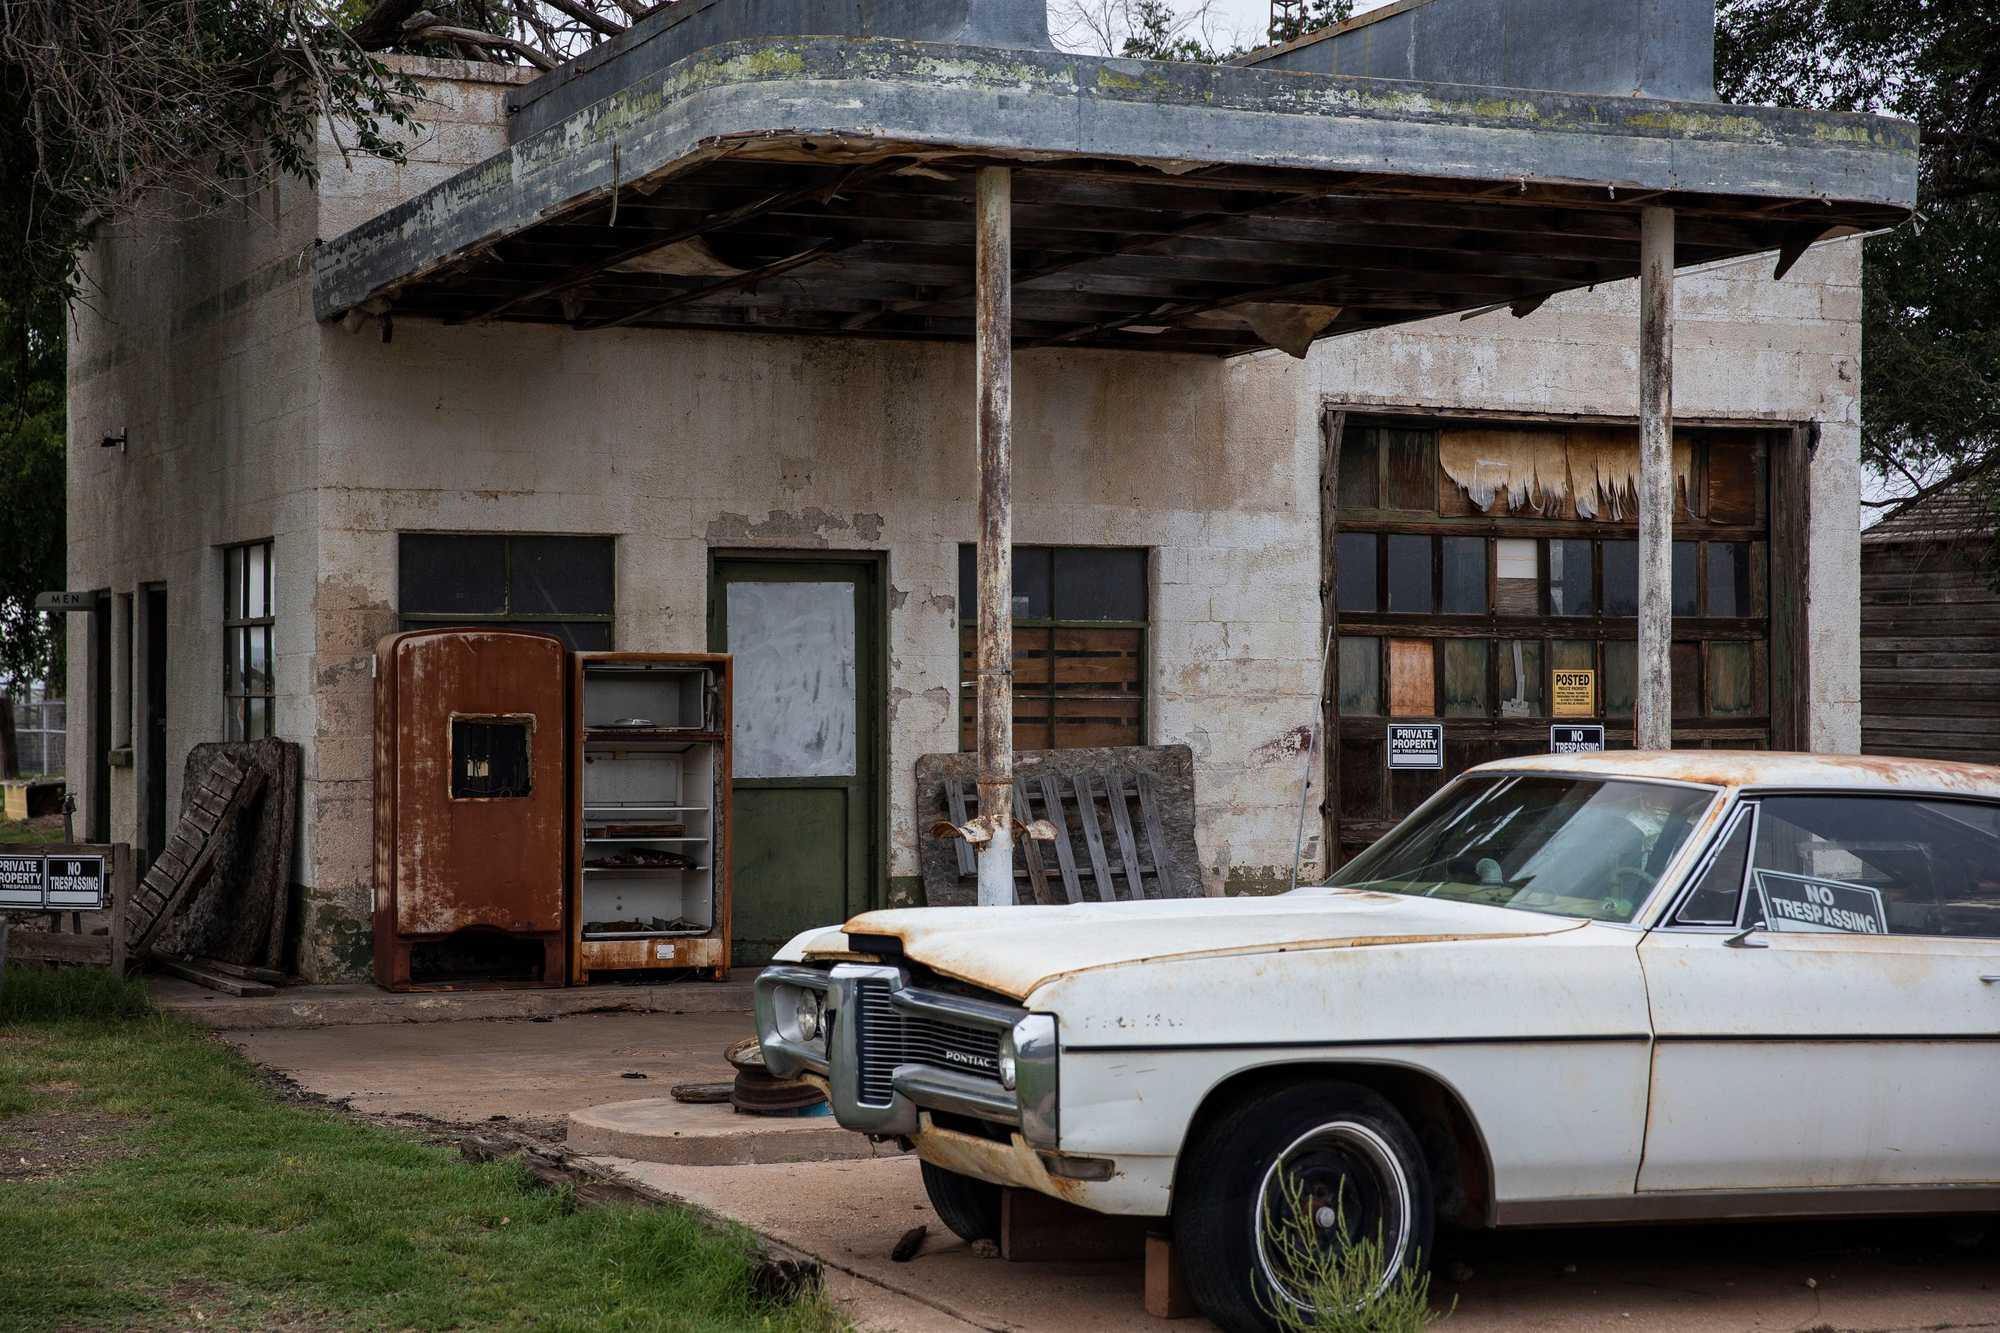 In Glenrio, Texas, you can see the traces of Route 66 and the motels and gas stations that once thrived here. Glenrio became a ghost town when it was bypassed by construction of a new interstate.